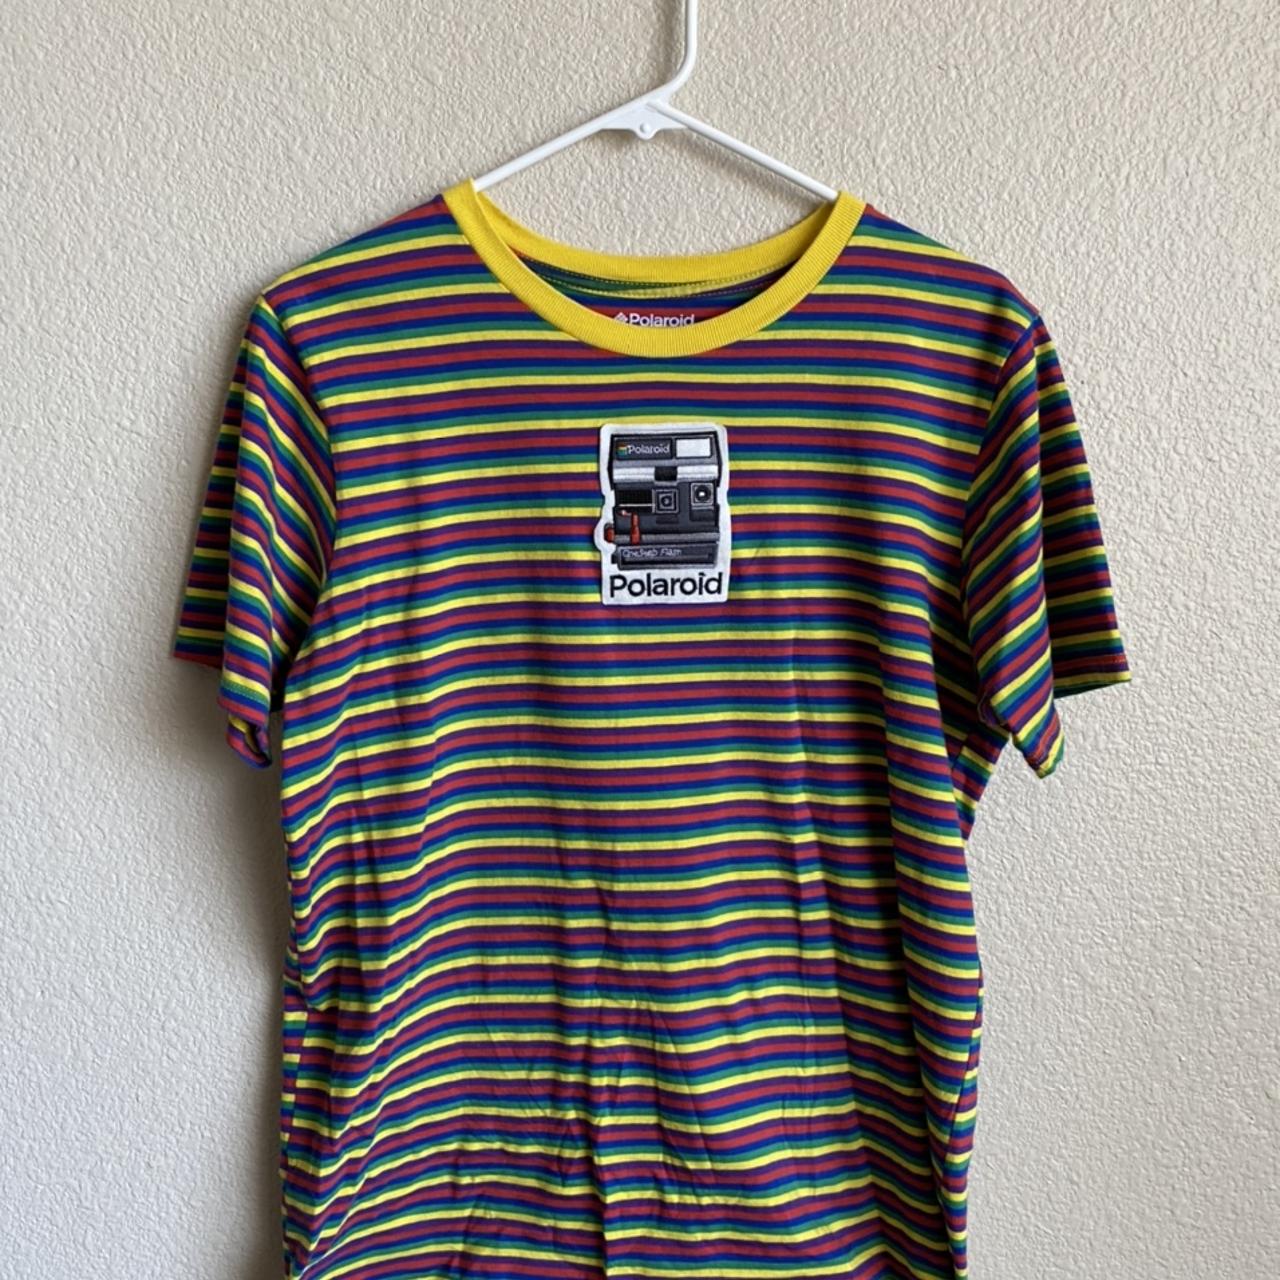 Polaroid Patch Graphic Tee Size:M I never wear it;(... - Depop